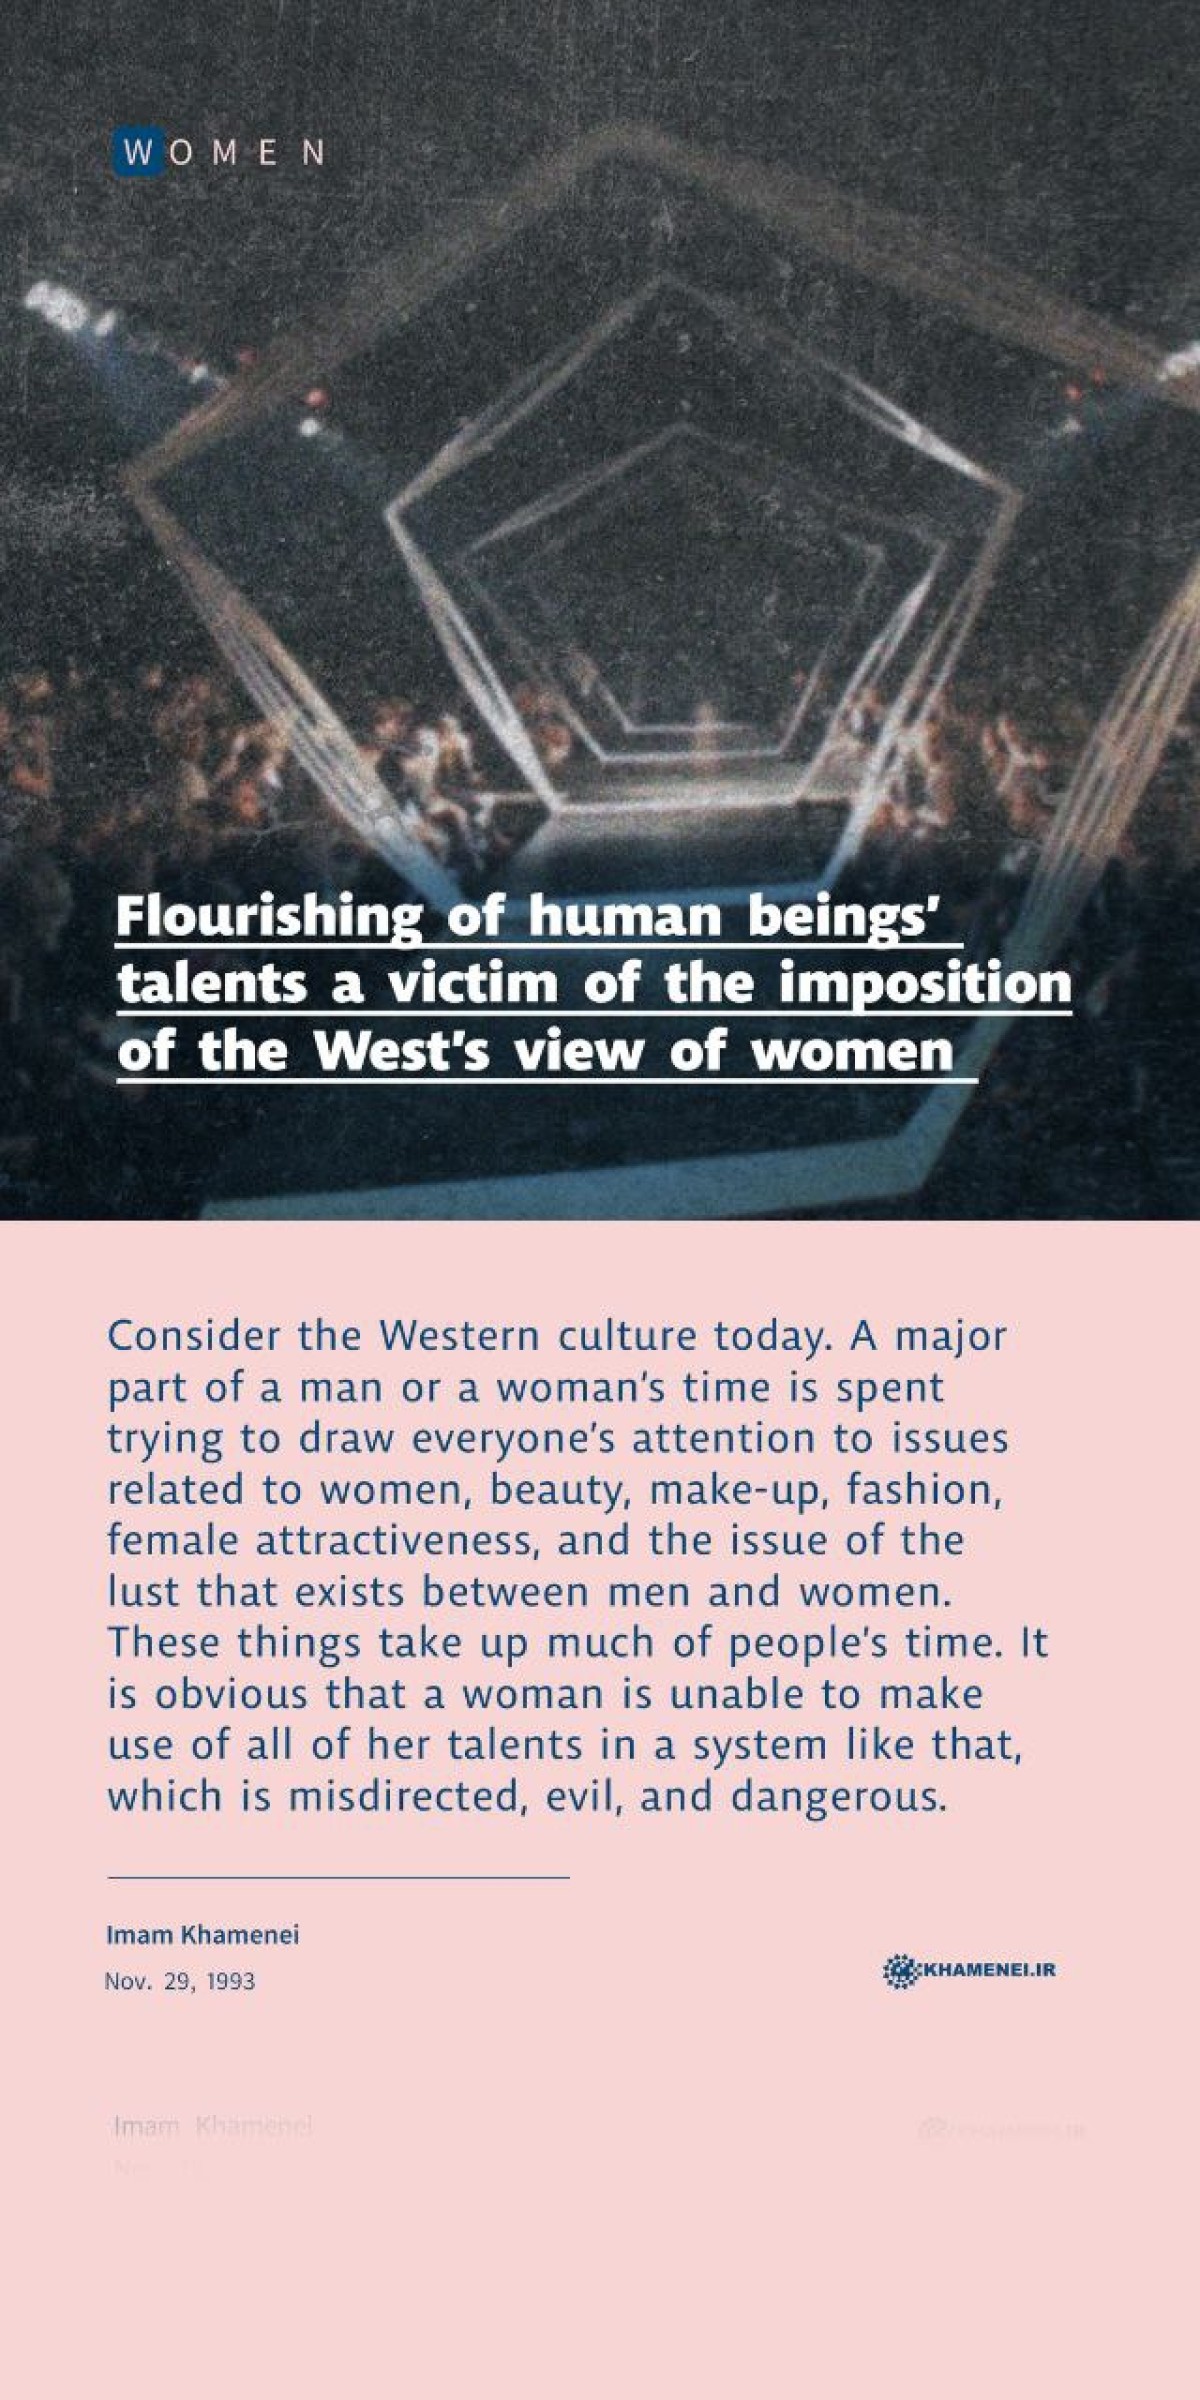 Flourishing of human beings’ talents a victim of the imposition of the West’s view of women